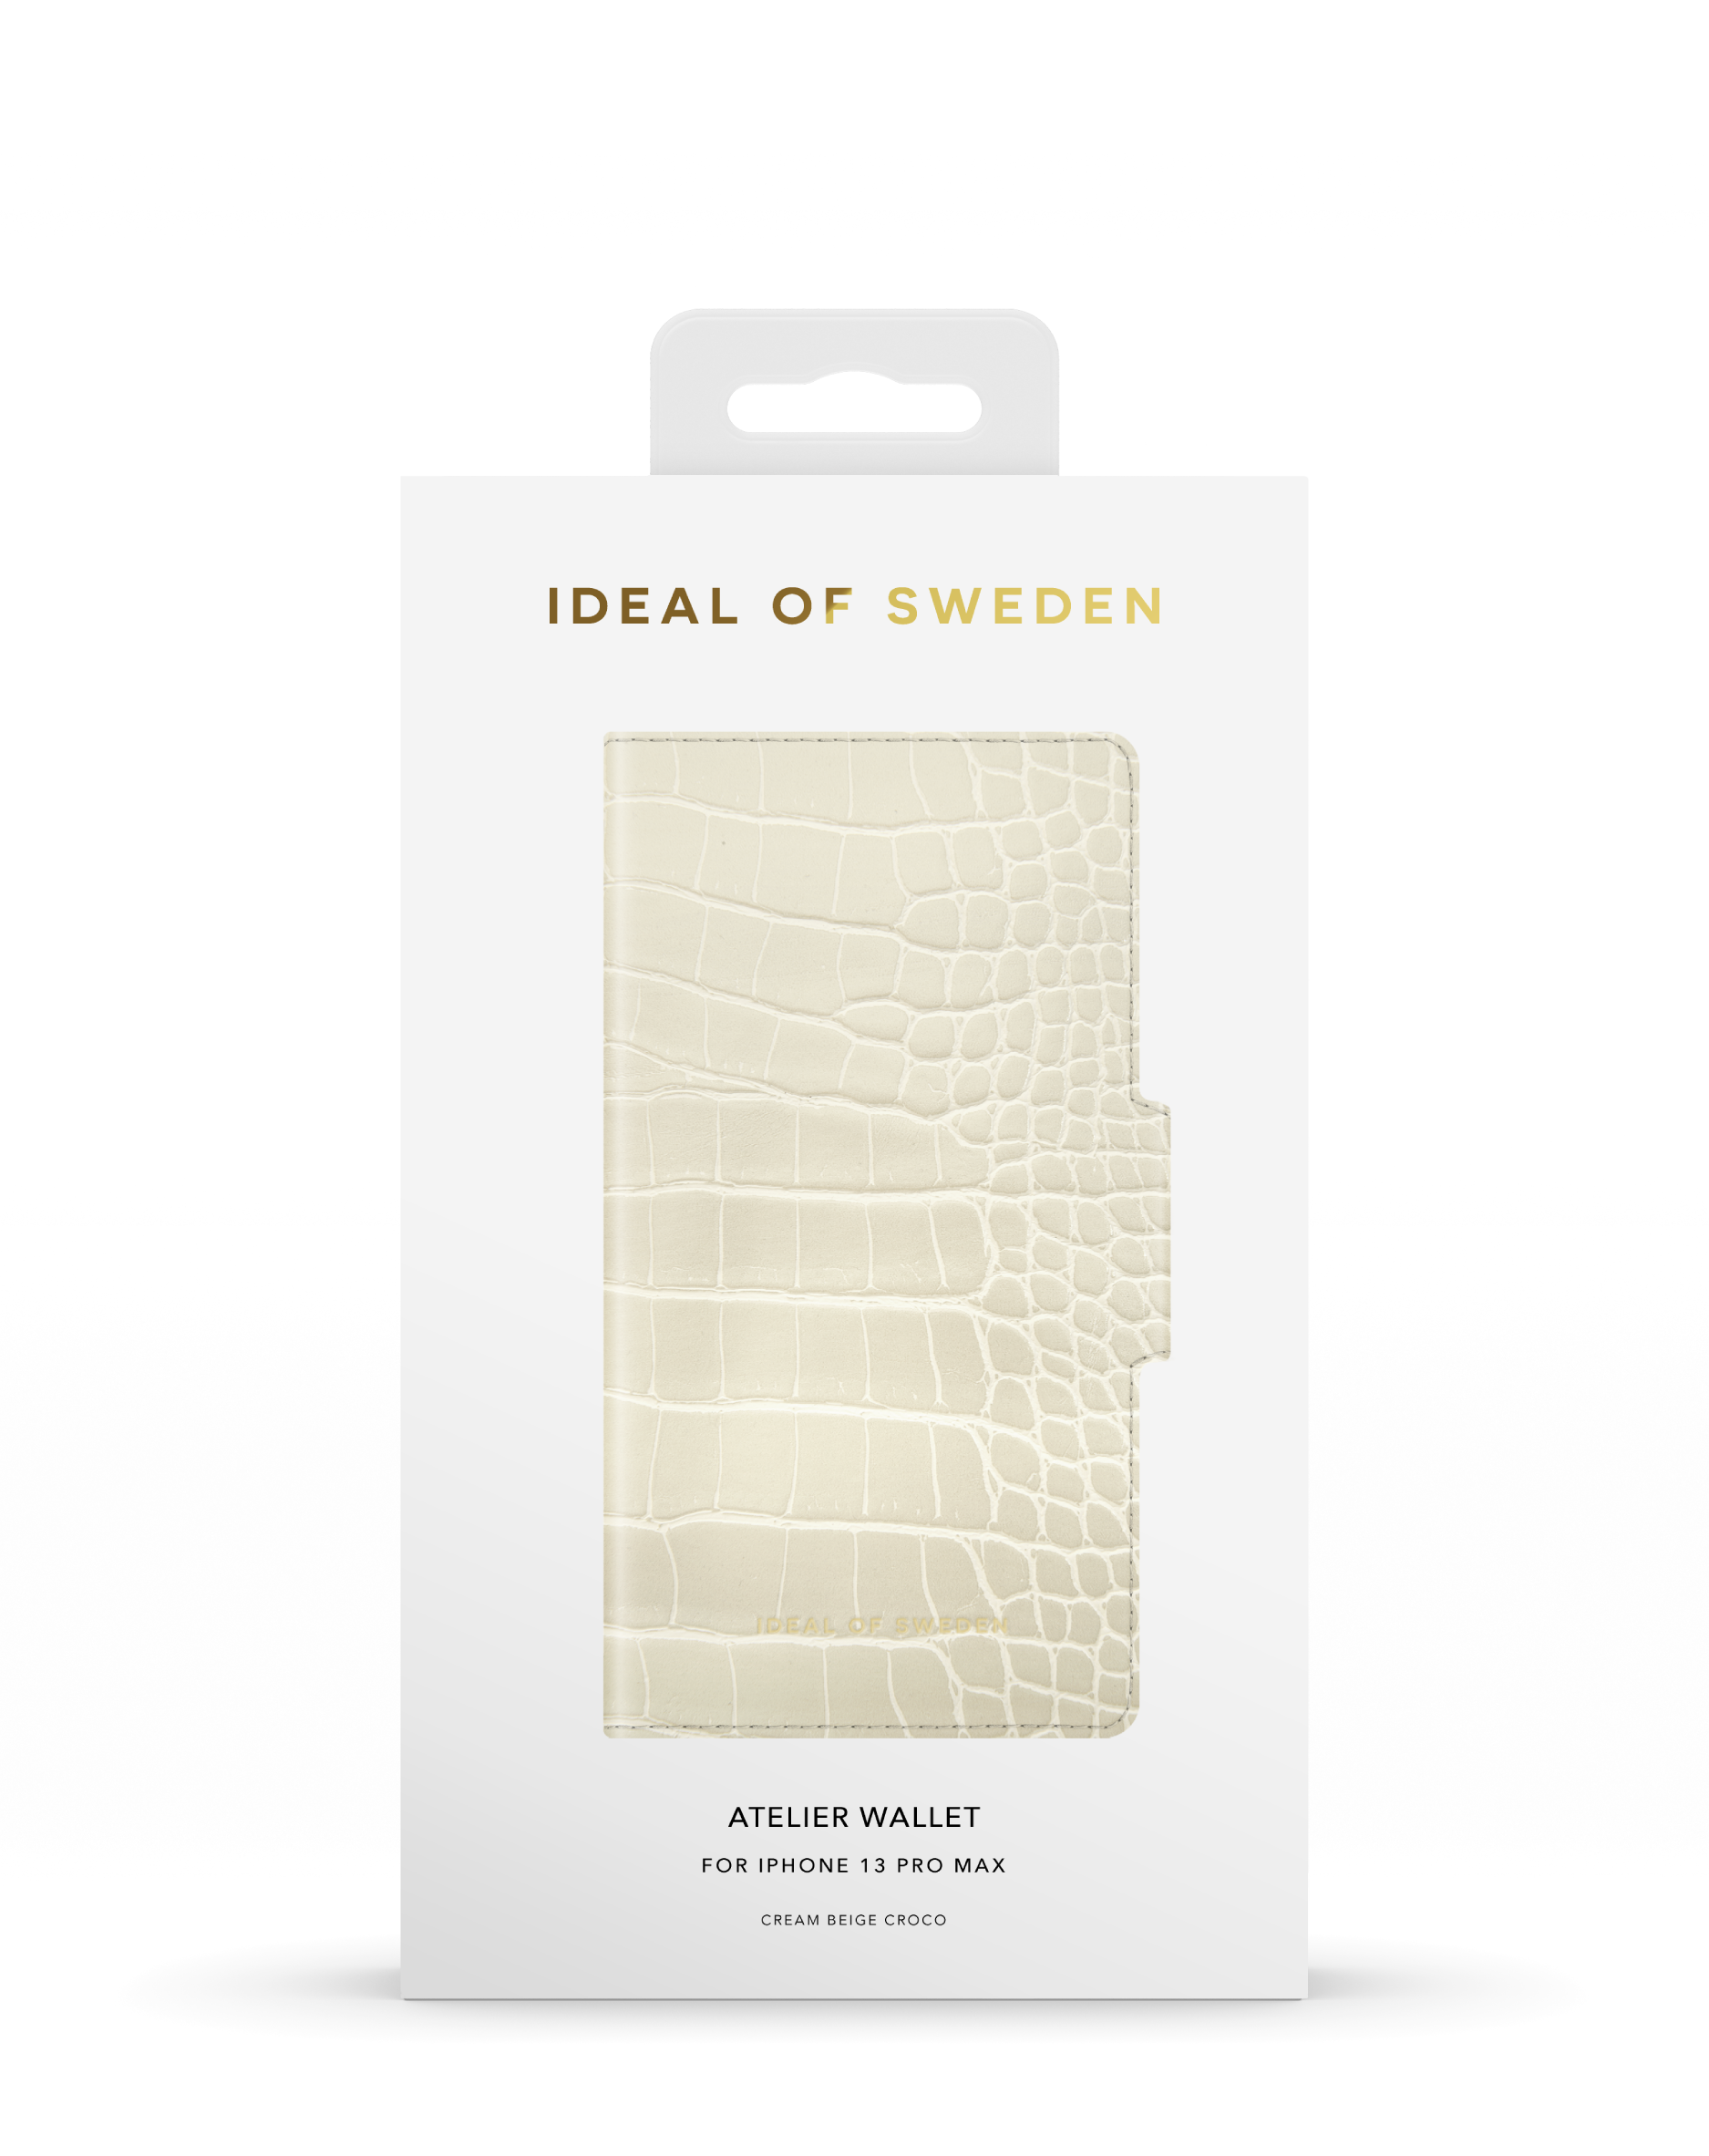 IDAWSS22-I2167-395, Pro OF 13 IDEAL Max, Cream Apple, Beige SWEDEN iPhone Bookcover,